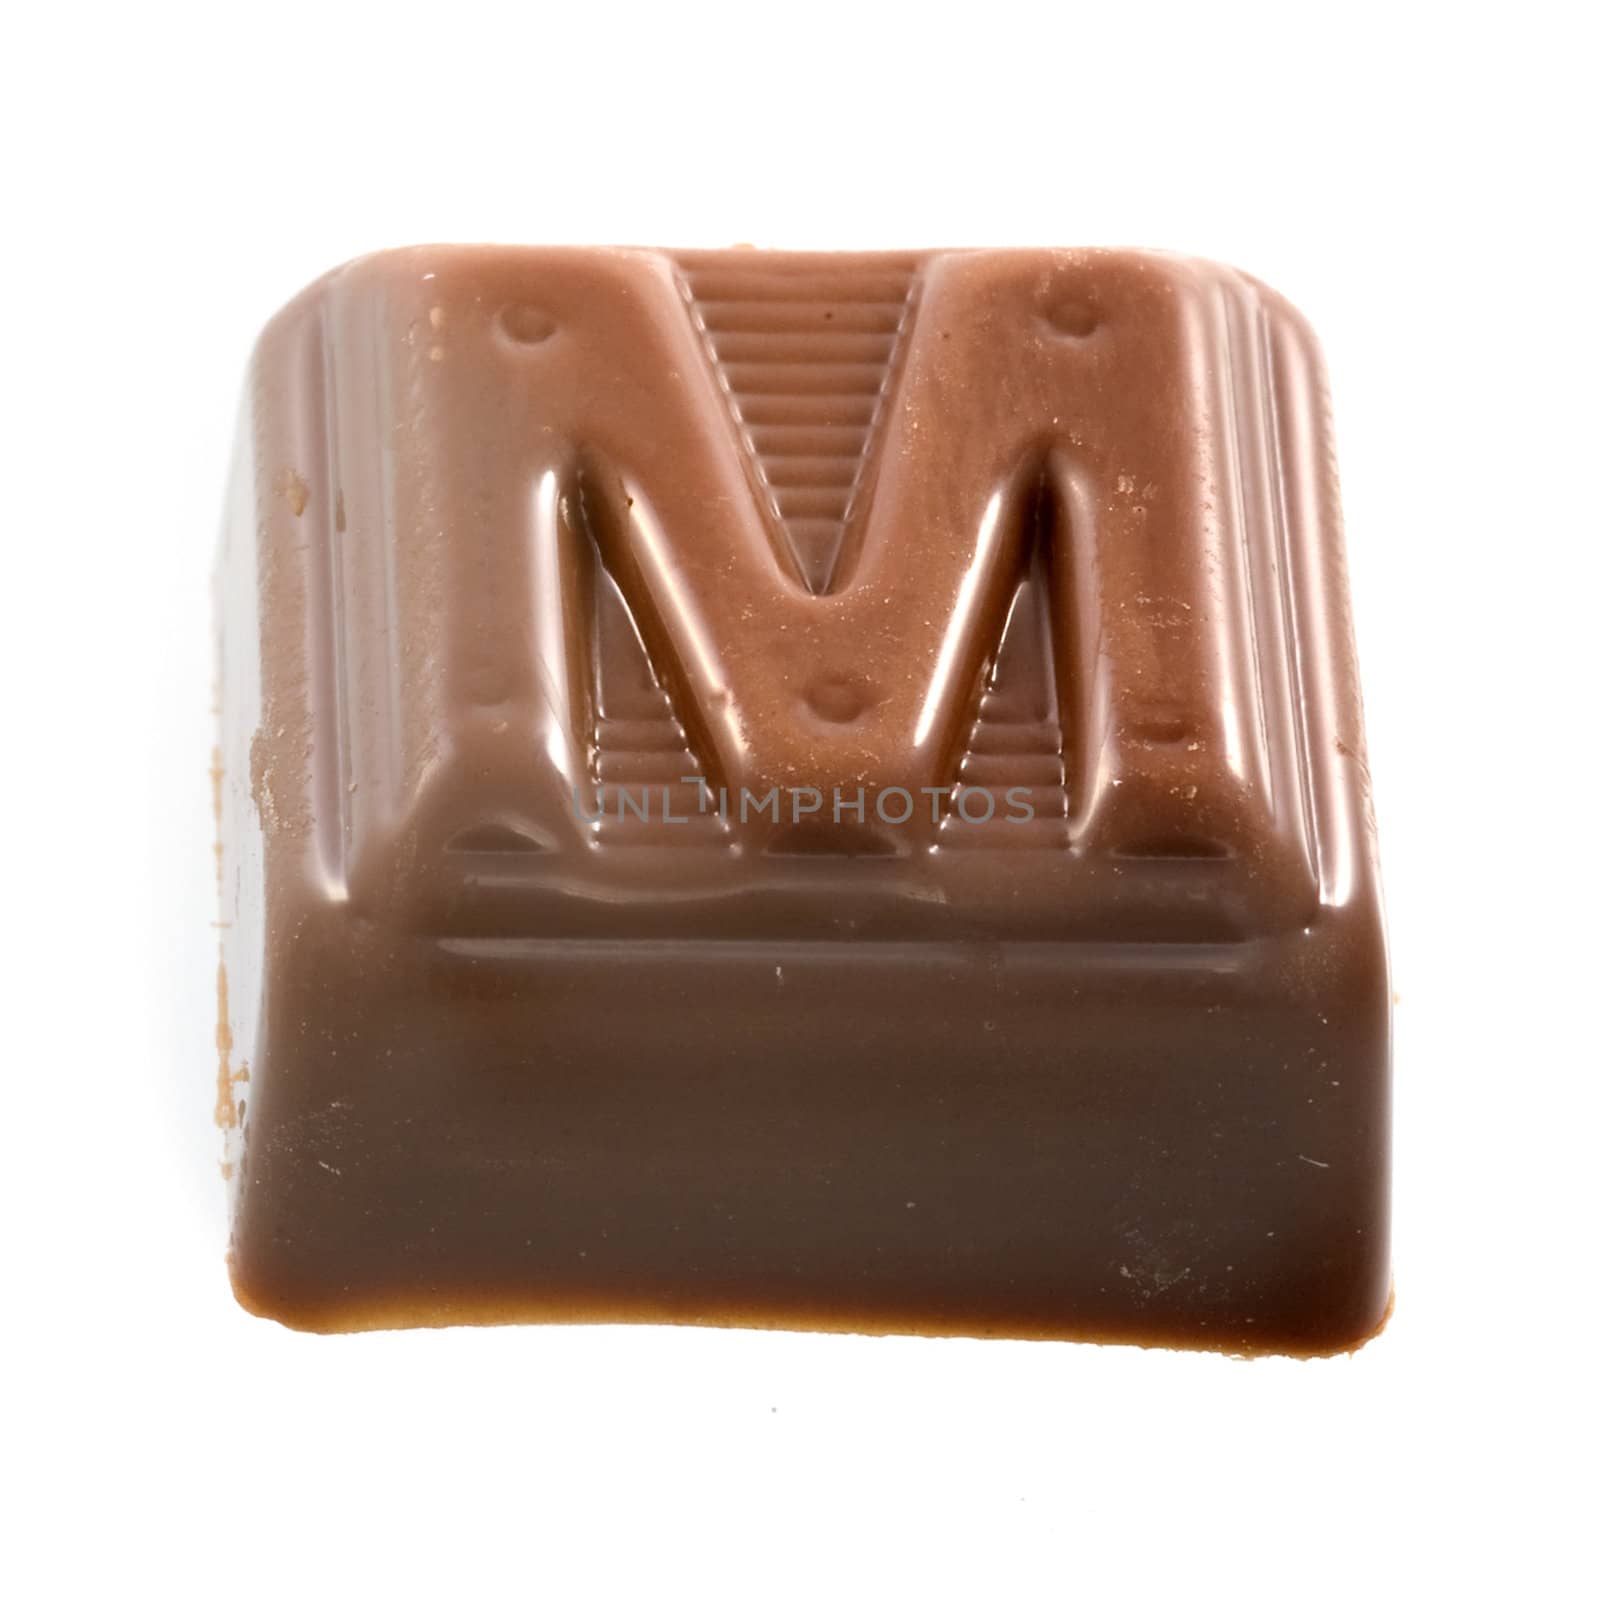 The chocolate letter "M"